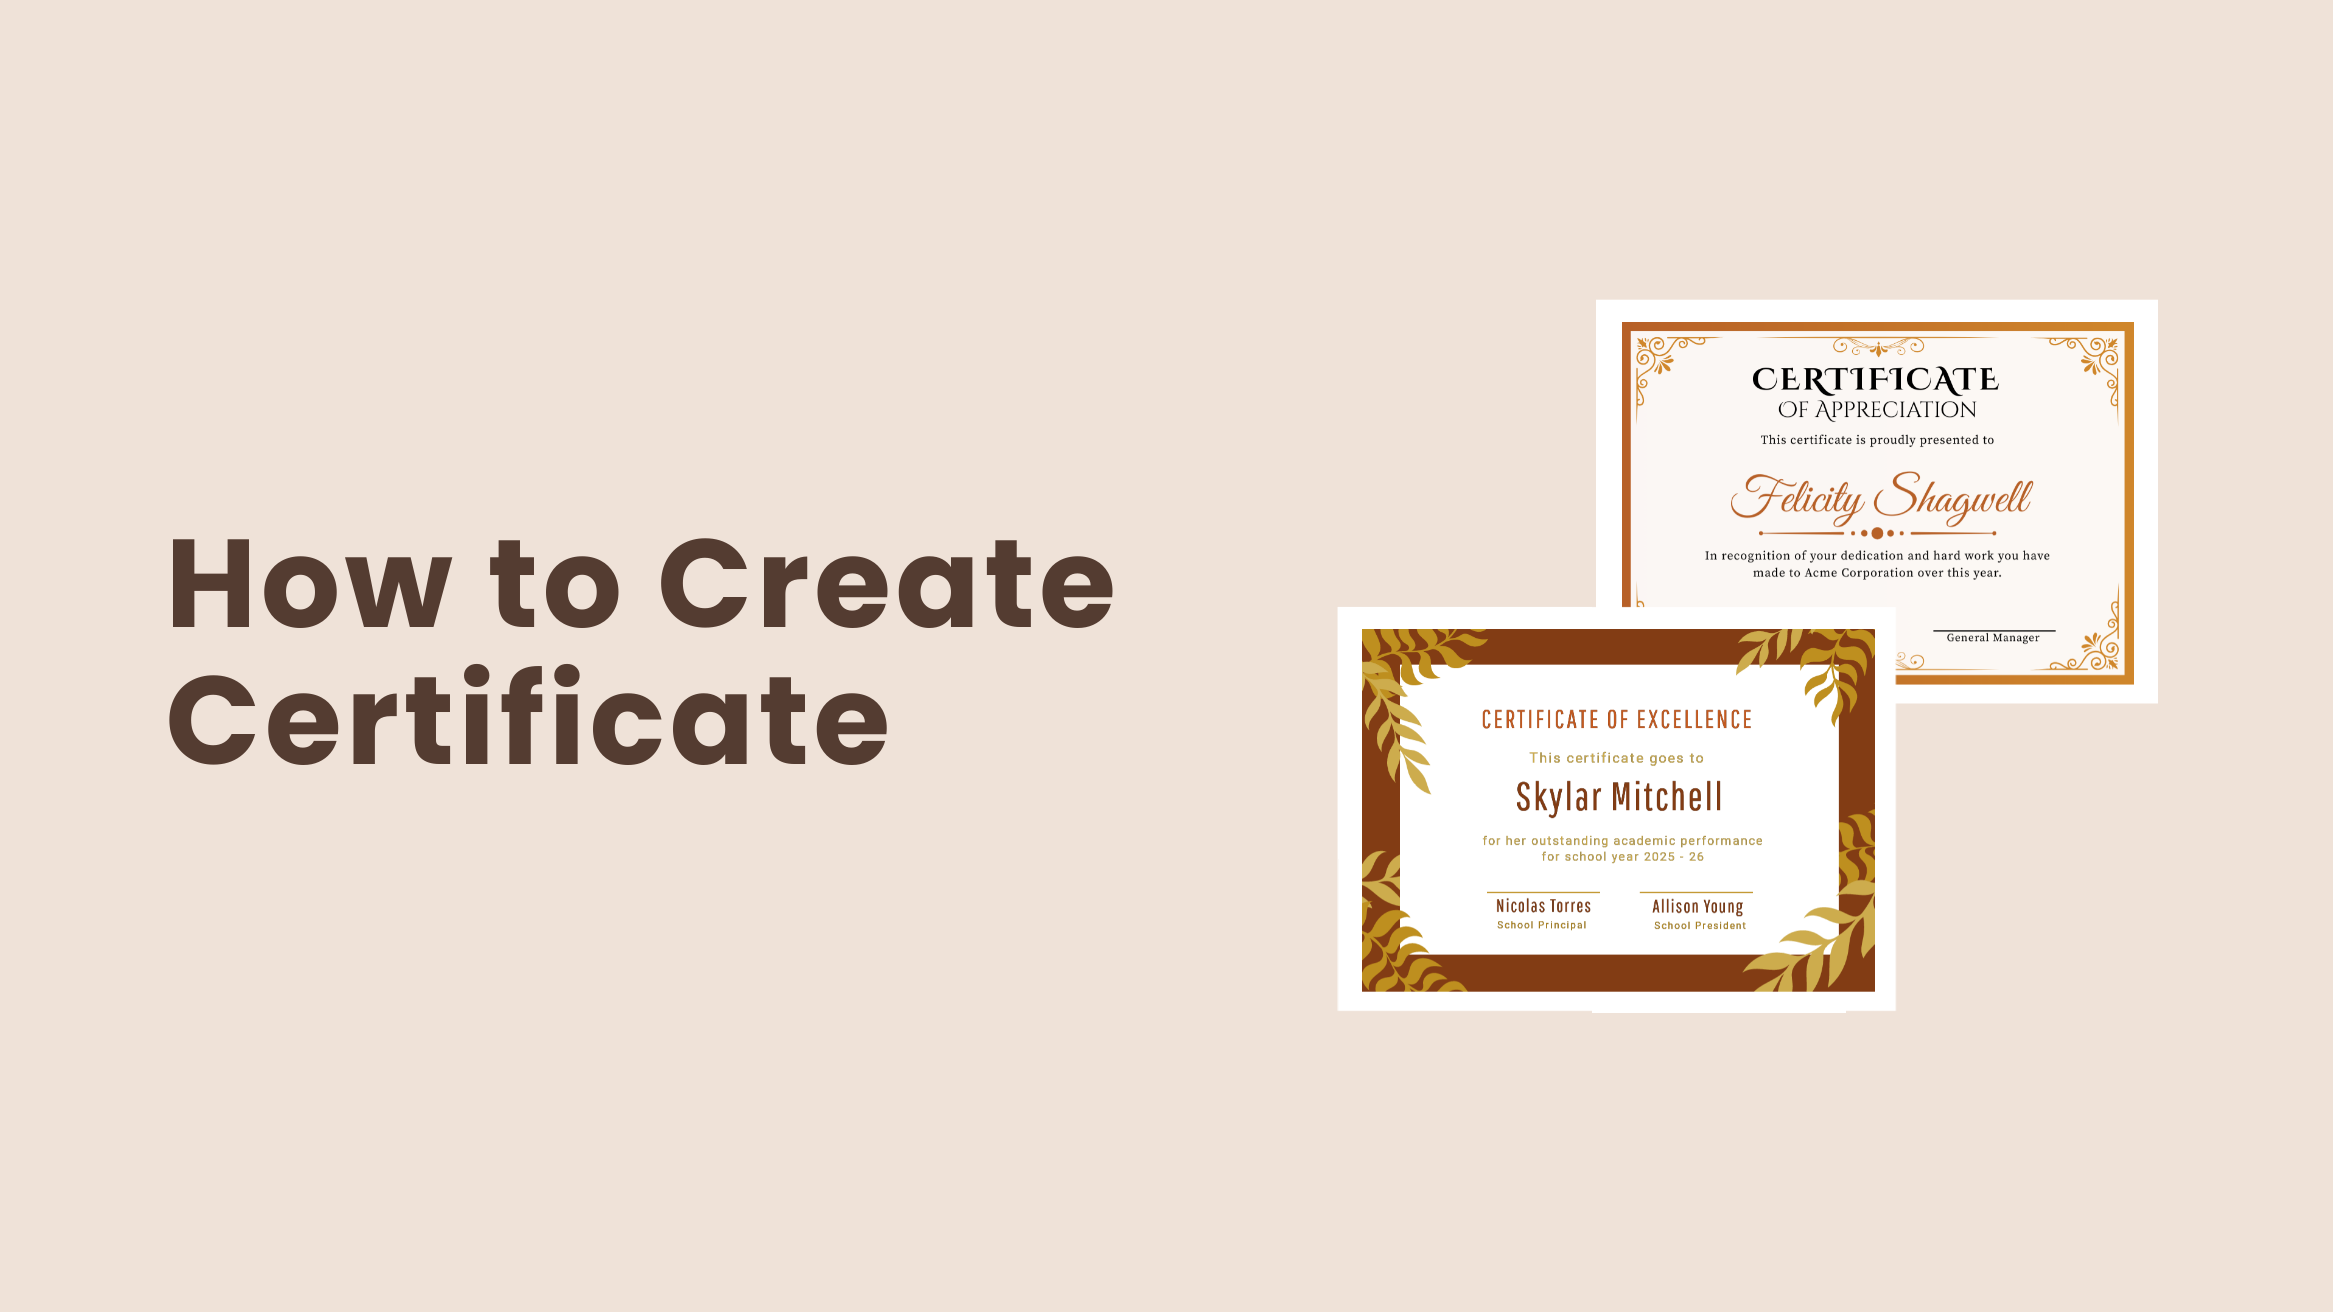 How to Create Certificate